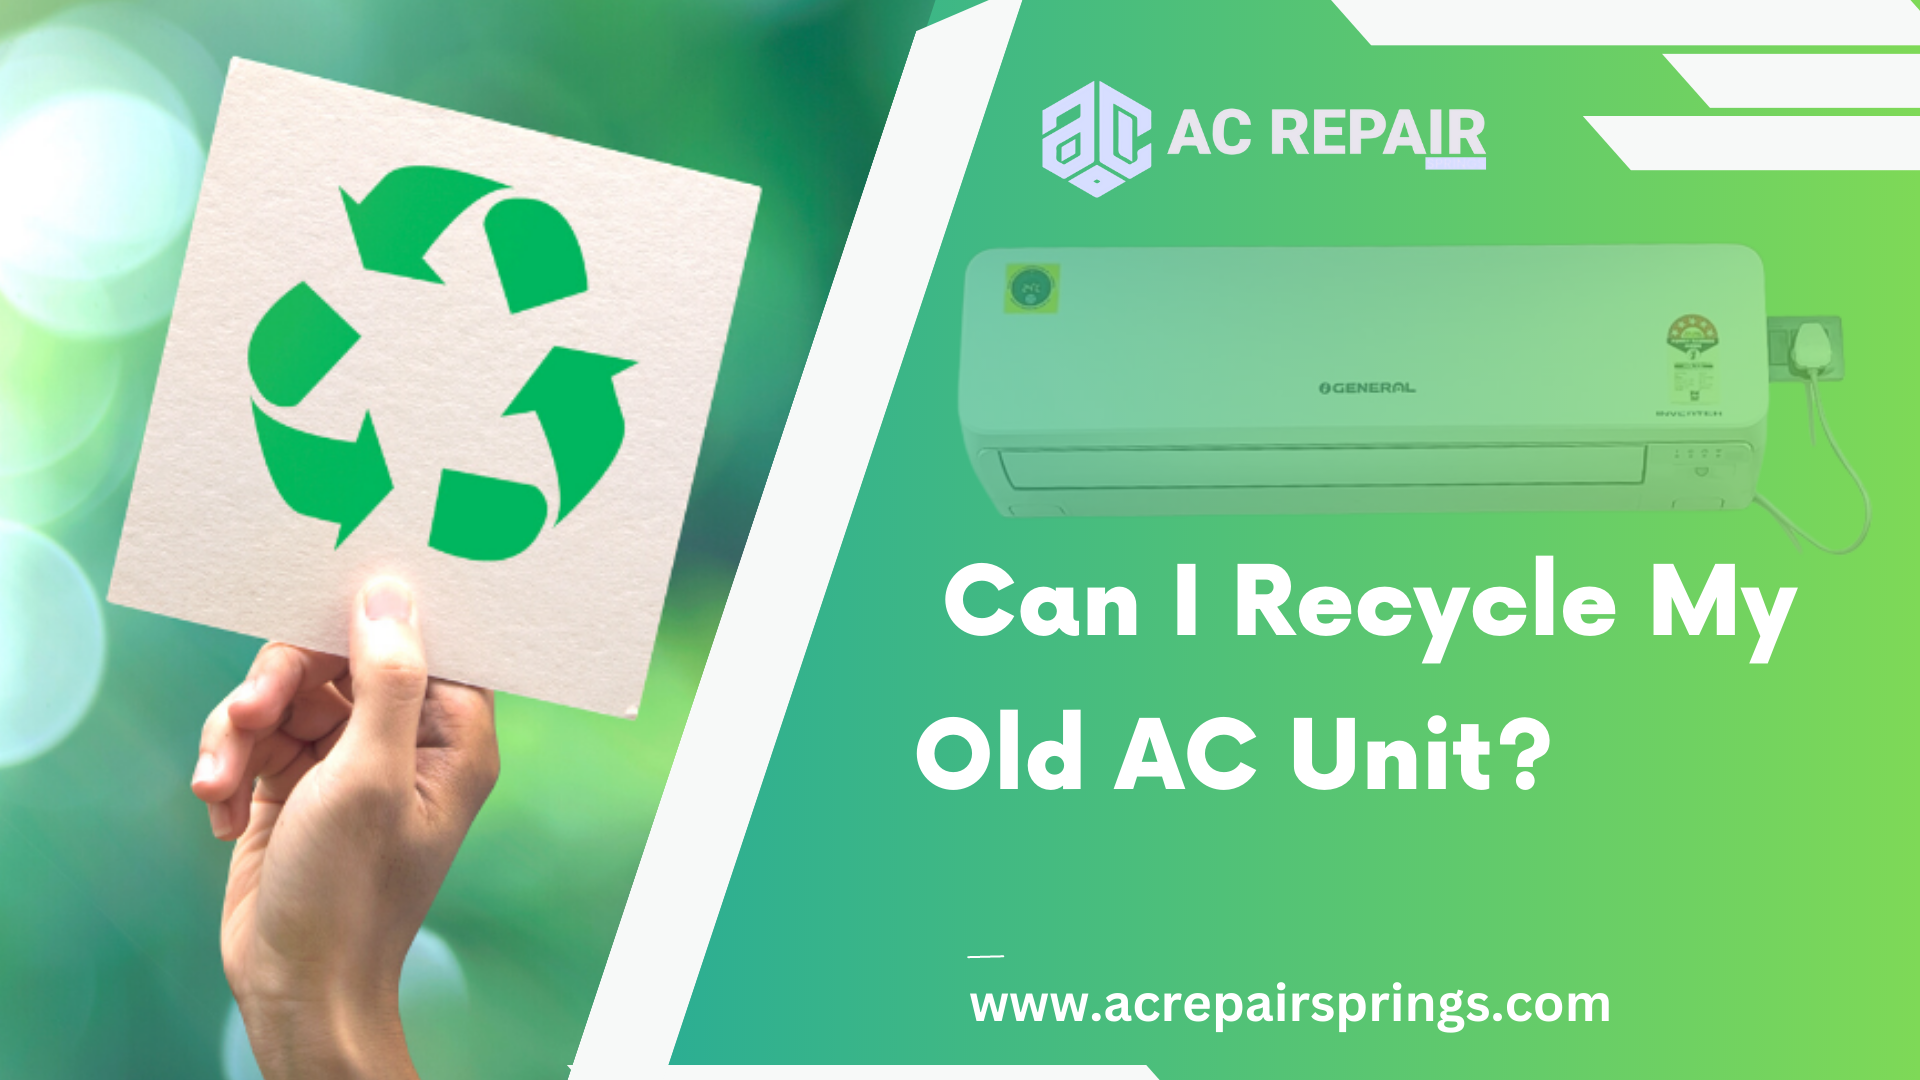 Can I Recycle My Old AC Unit?